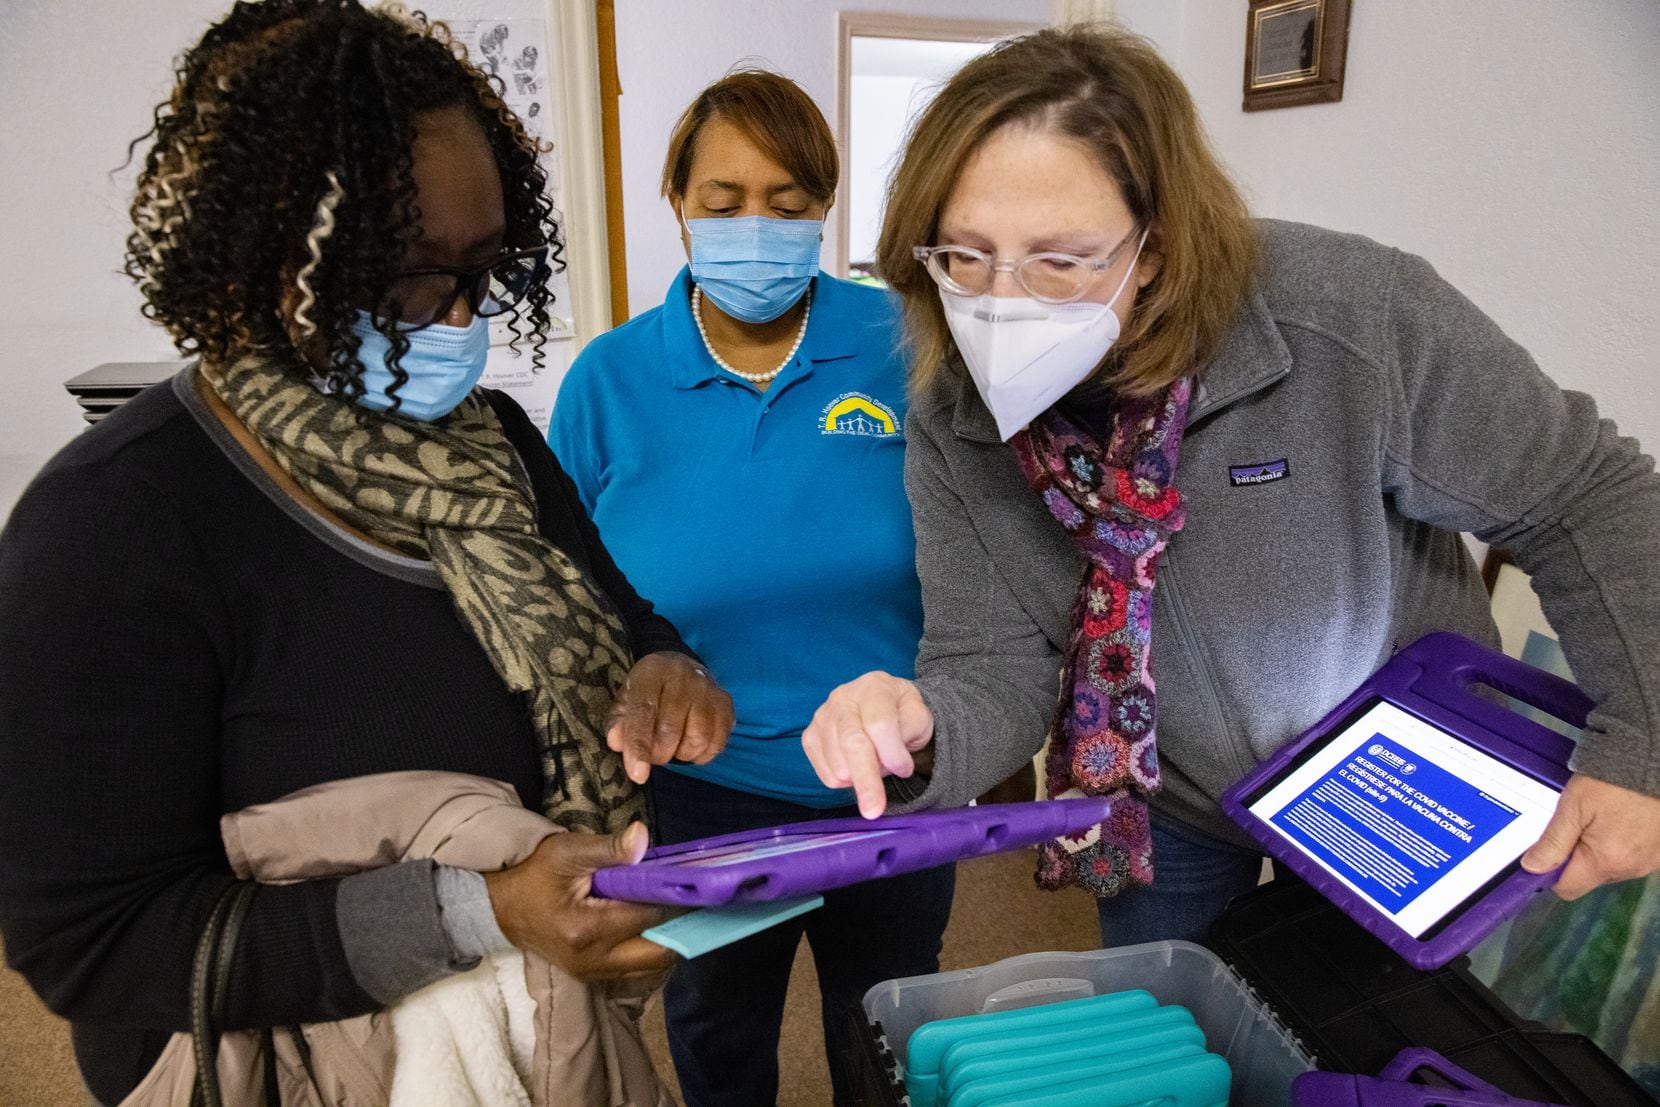 From left: Frenchell White, executive director Sherri Mixon  and Carrie Bhasin prepared iPads for vaccine registration Tuesday at T.R. Hoover community center in Dallas. People arriving for a food distribution were also signed up to get COVID-19 shots.